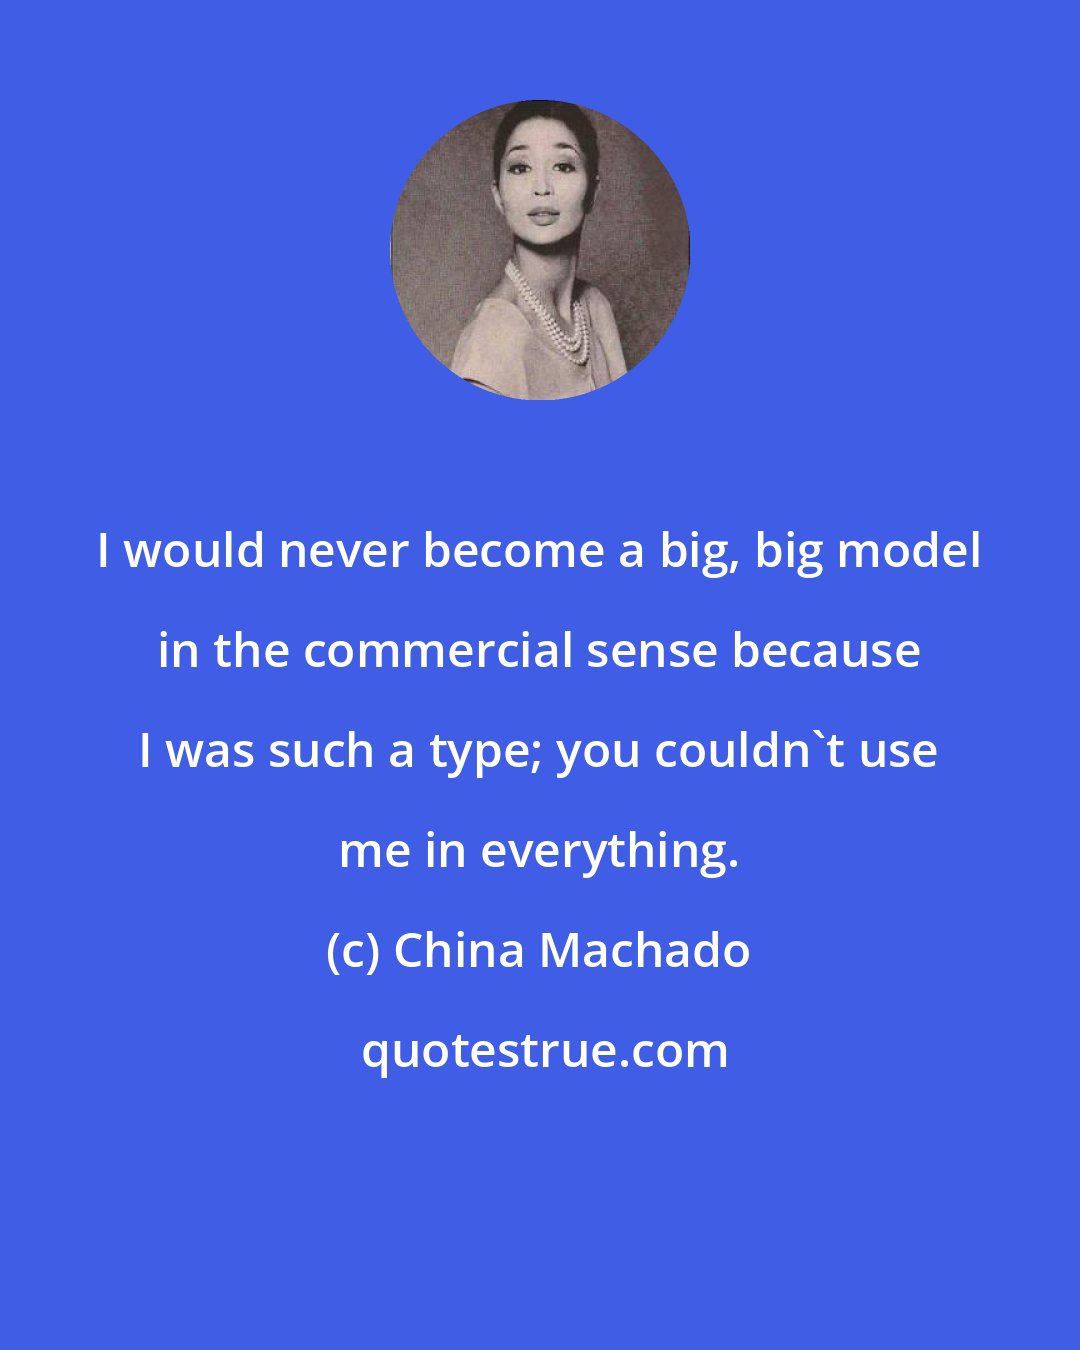 China Machado: I would never become a big, big model in the commercial sense because I was such a type; you couldn't use me in everything.